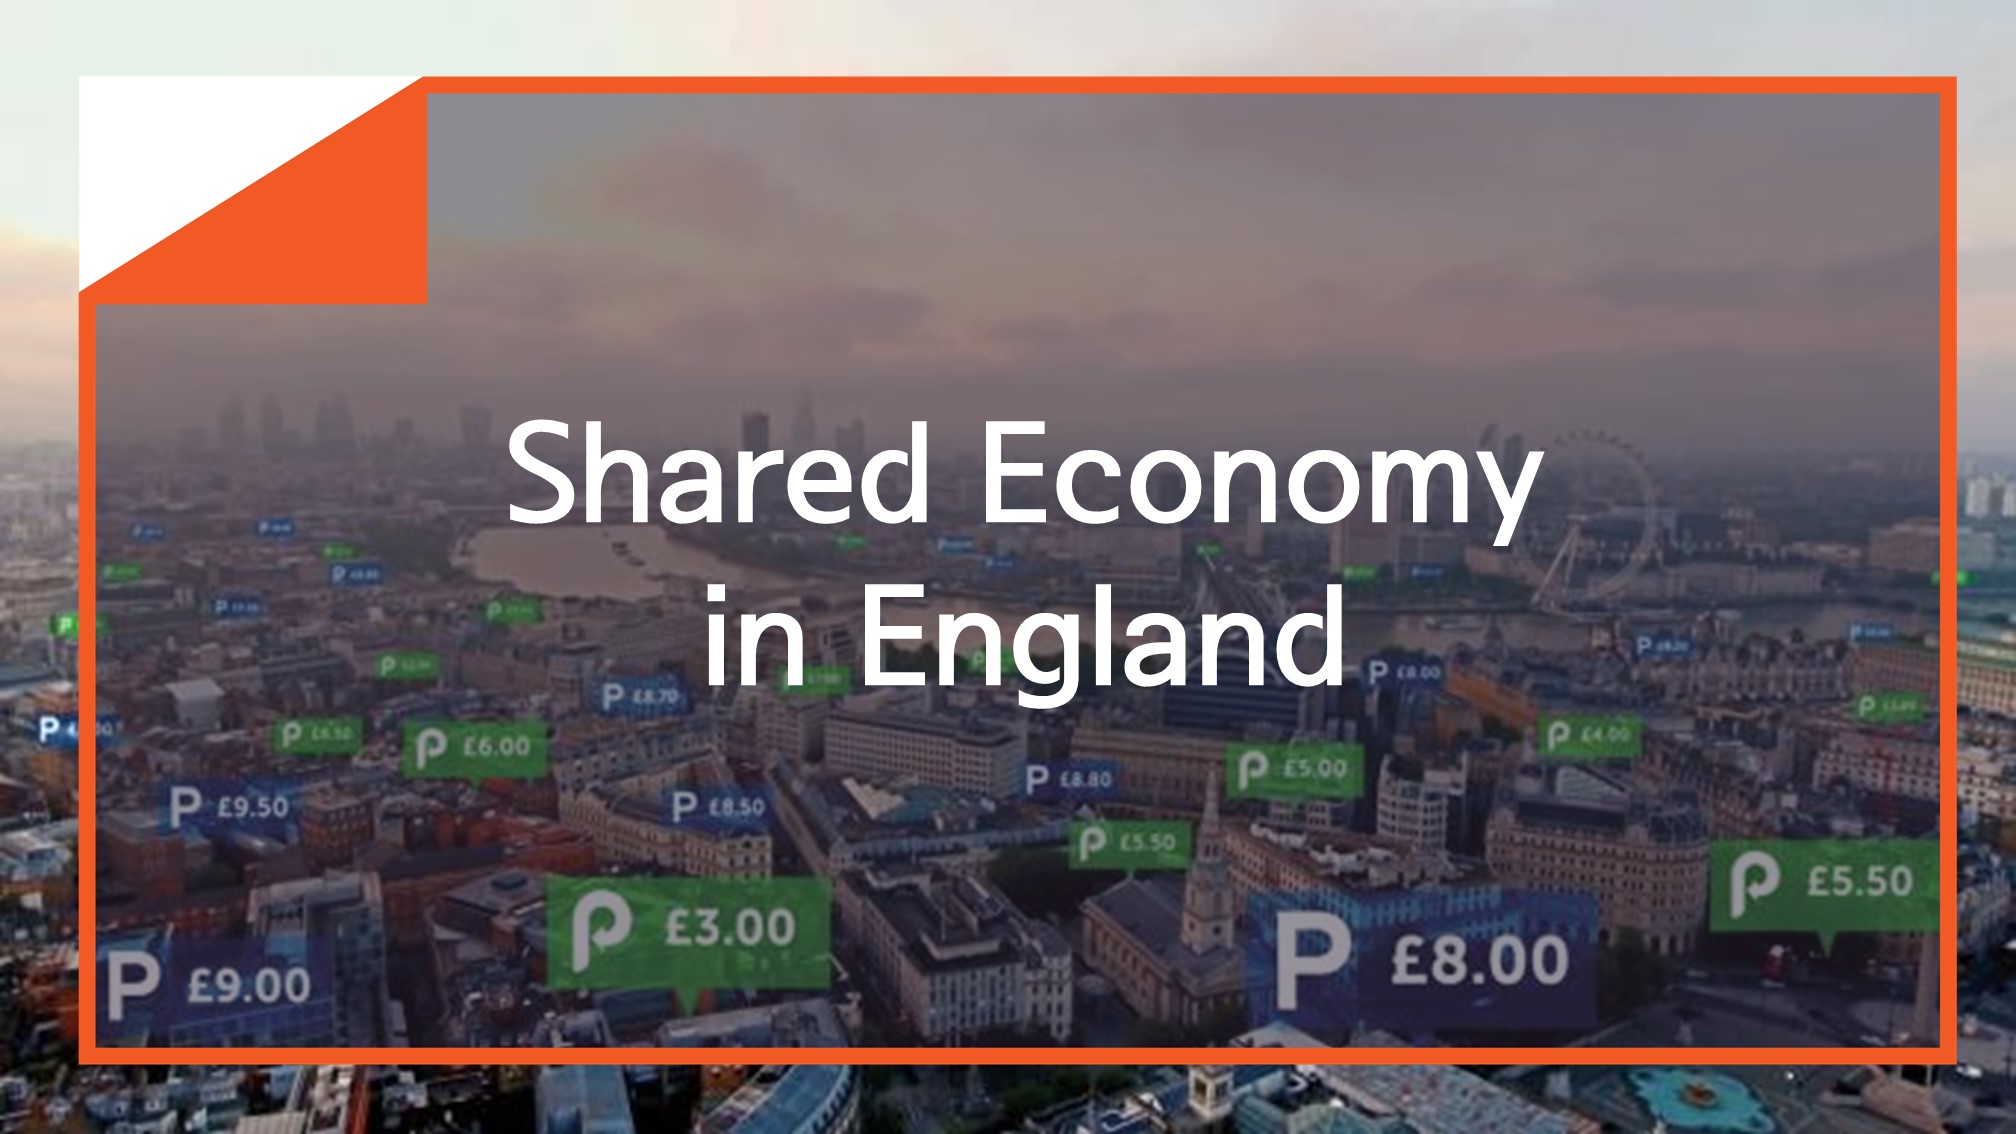 [Resources] Shared Economy in England